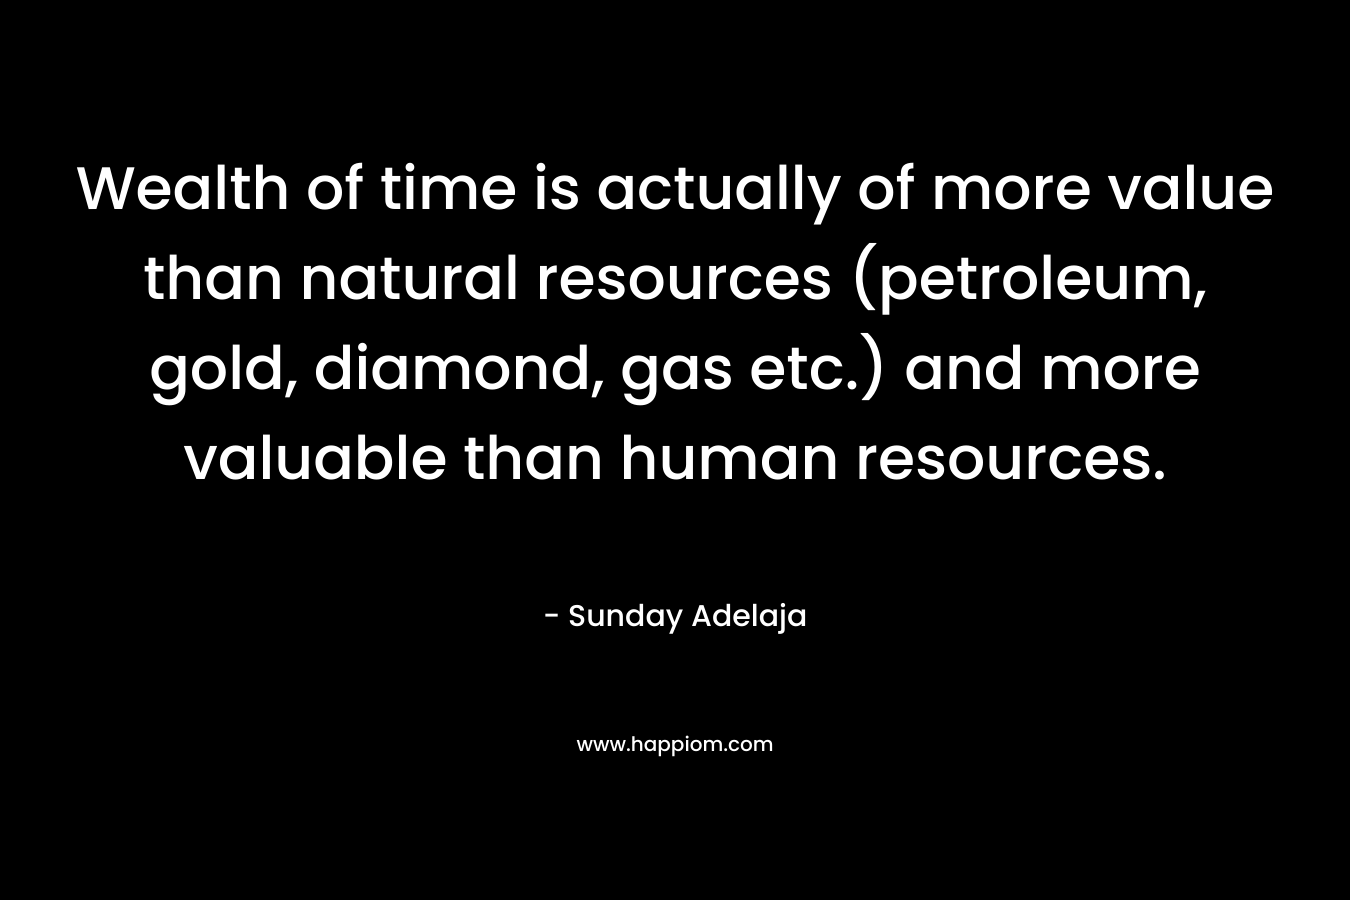 Wealth of time is actually of more value than natural resources (petroleum, gold, diamond, gas etc.) and more valuable than human resources.